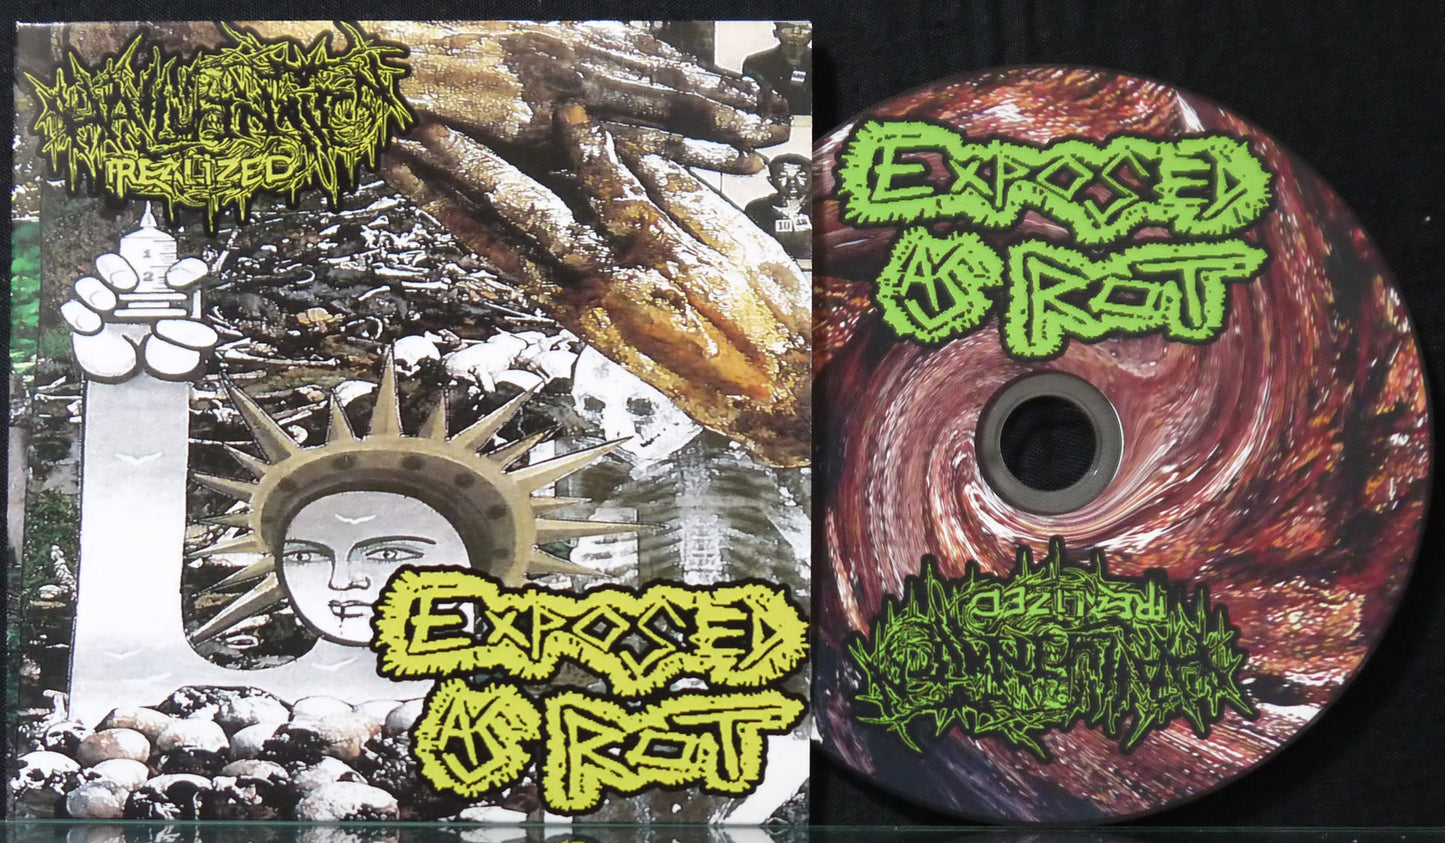 EXPOSED AS ROT / HALLUCINATION REALIZED Split CD